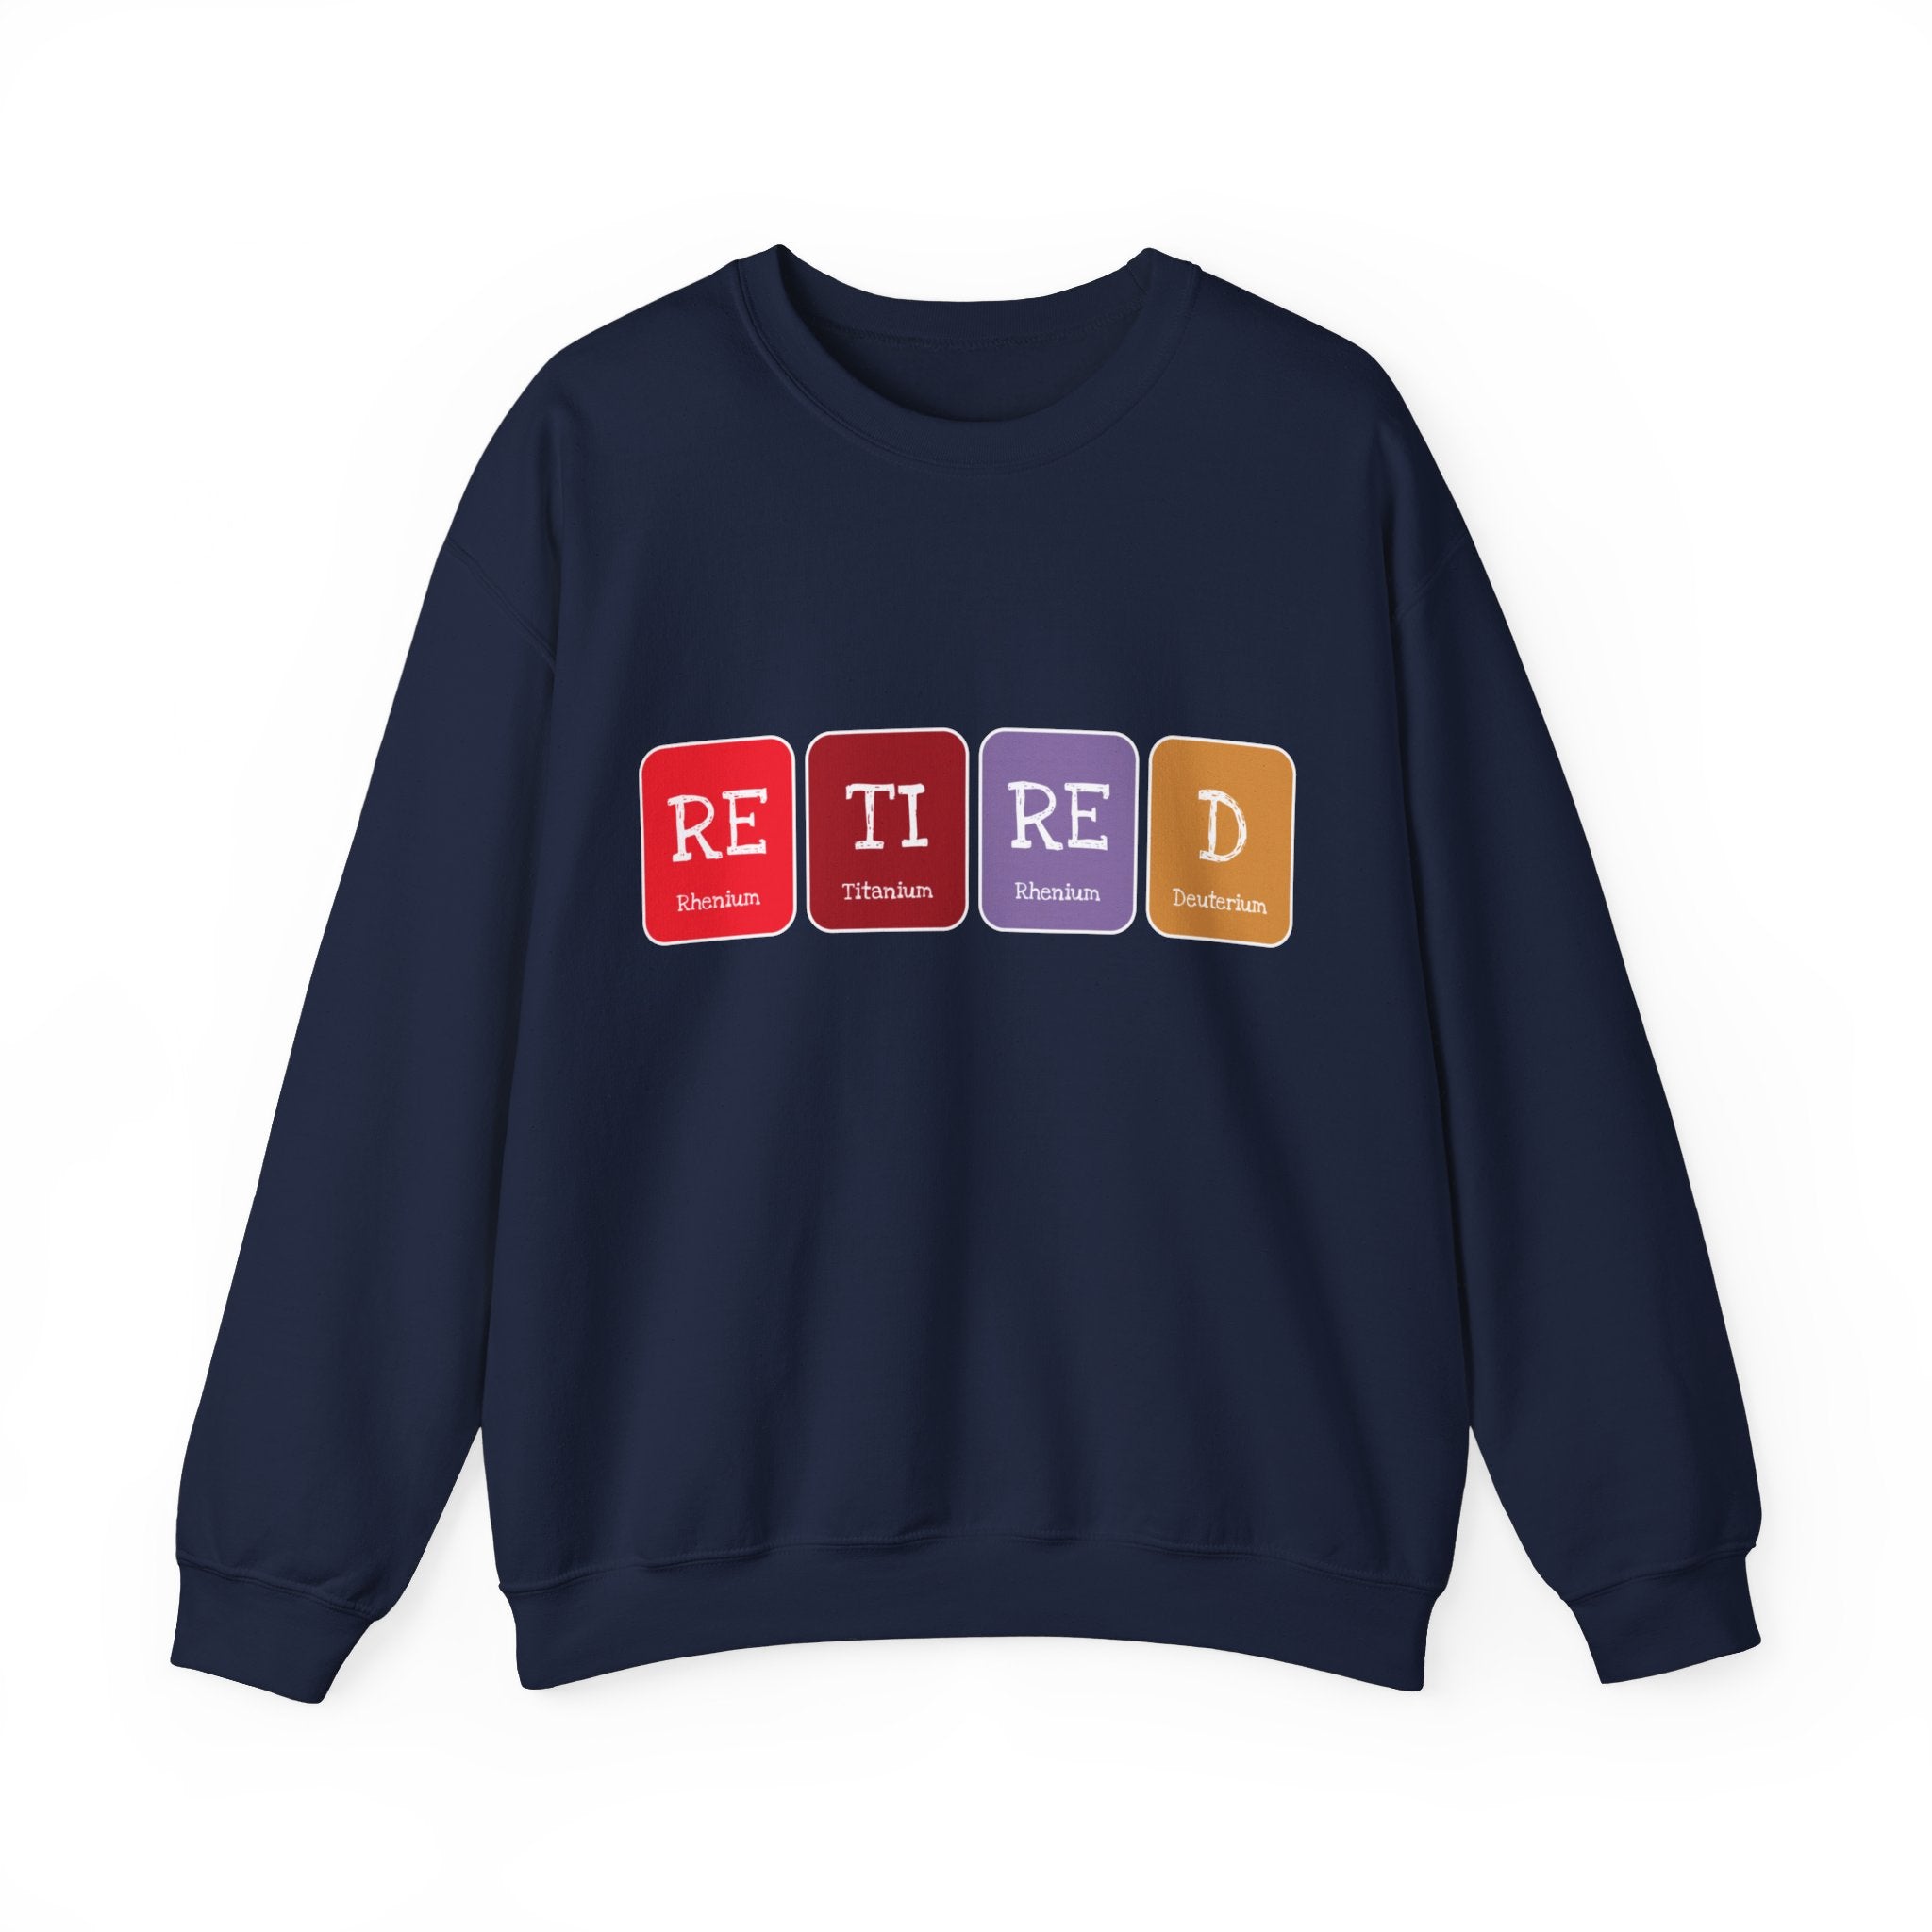 A navy blue Retired - Sweatshirt with colorful square blocks on the front spelling out "RETIRED," combining style and comfort.